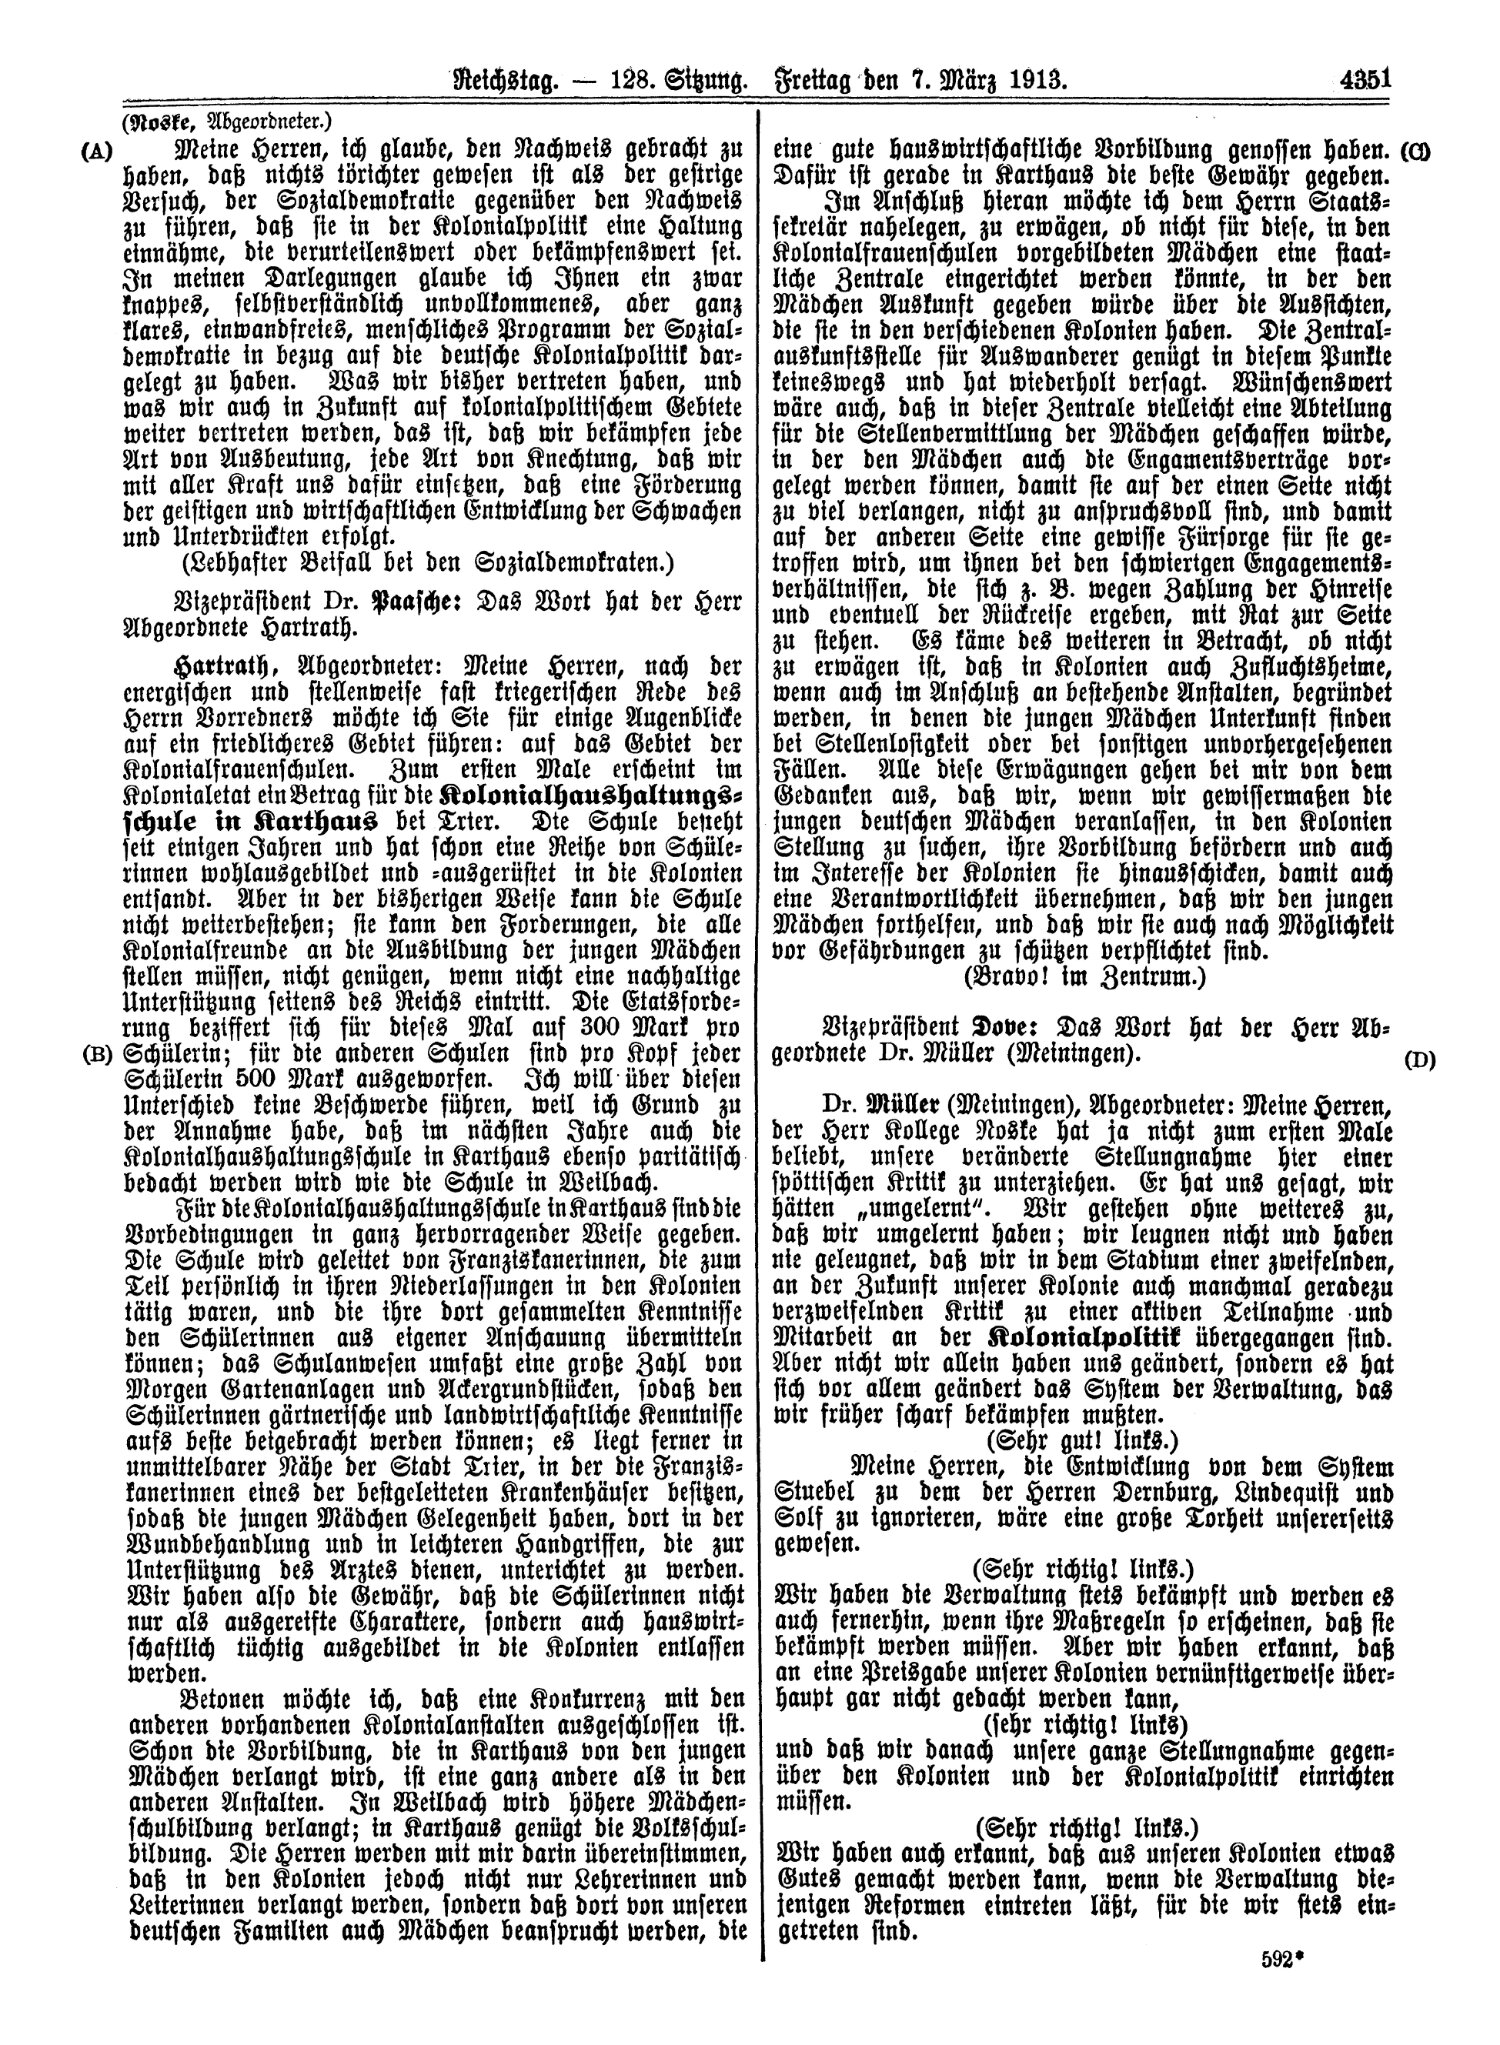 Scan of page 4351